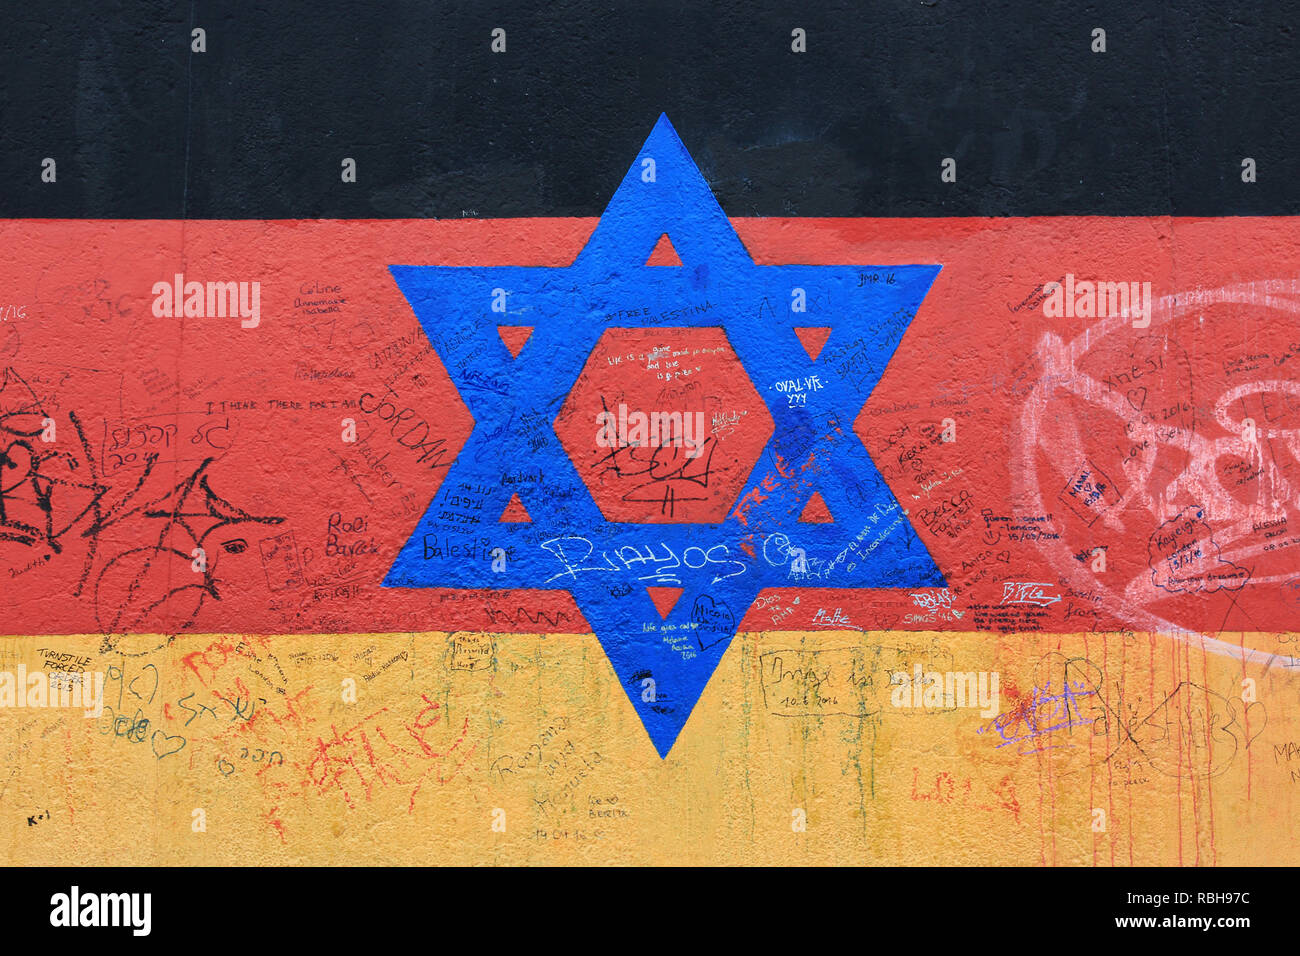 Berlin, -Germany : June 2016 : Flag of Germany and Israel painted on  Berlin Wall, East Side Gallery (Vaterland by Gunther Schafer) Stock Photo